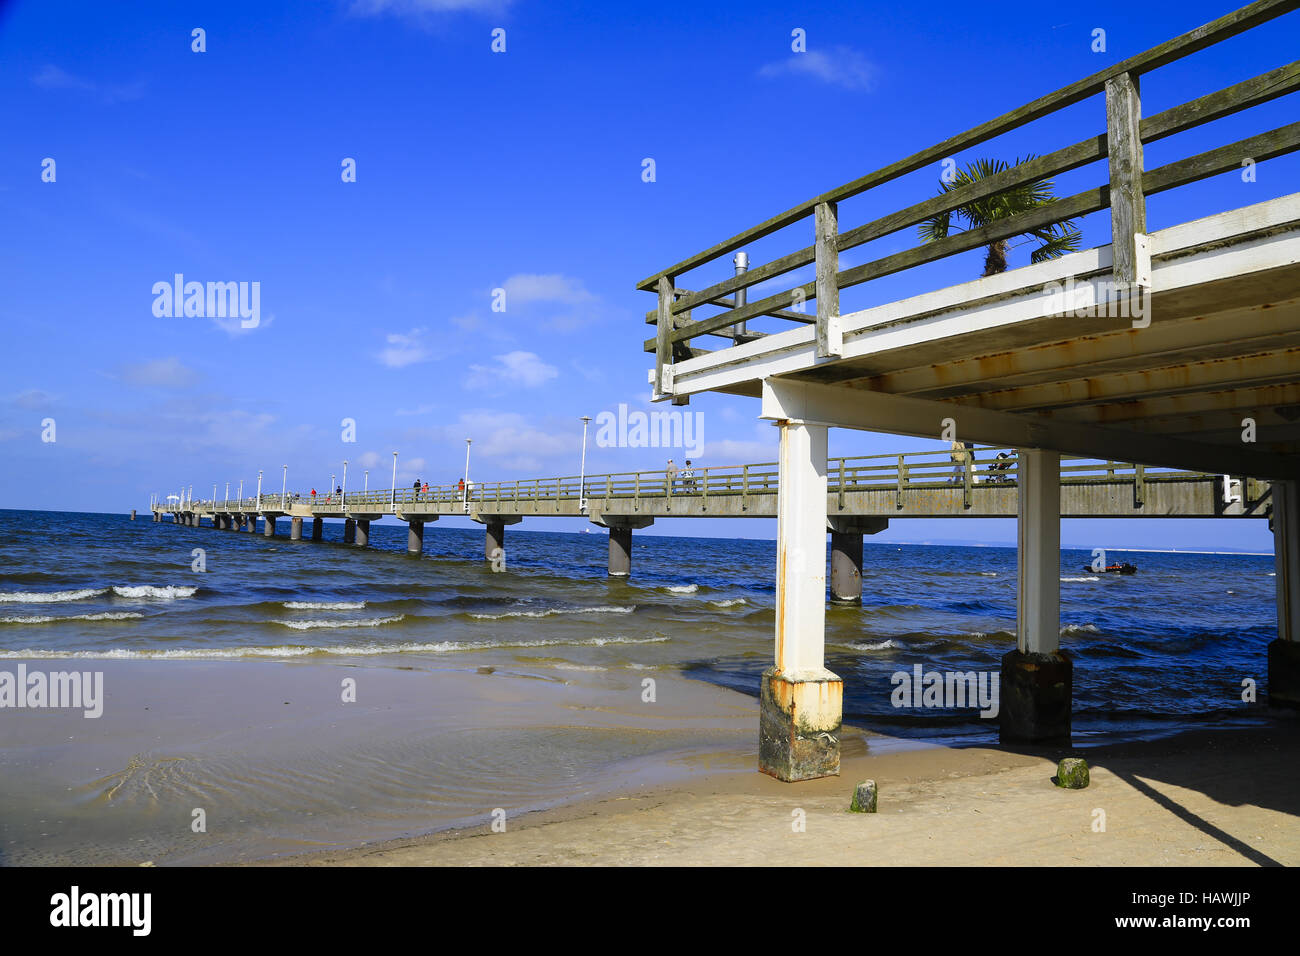 Pier in Ahlbeck, Baltic Sea, Germany Stock Photo